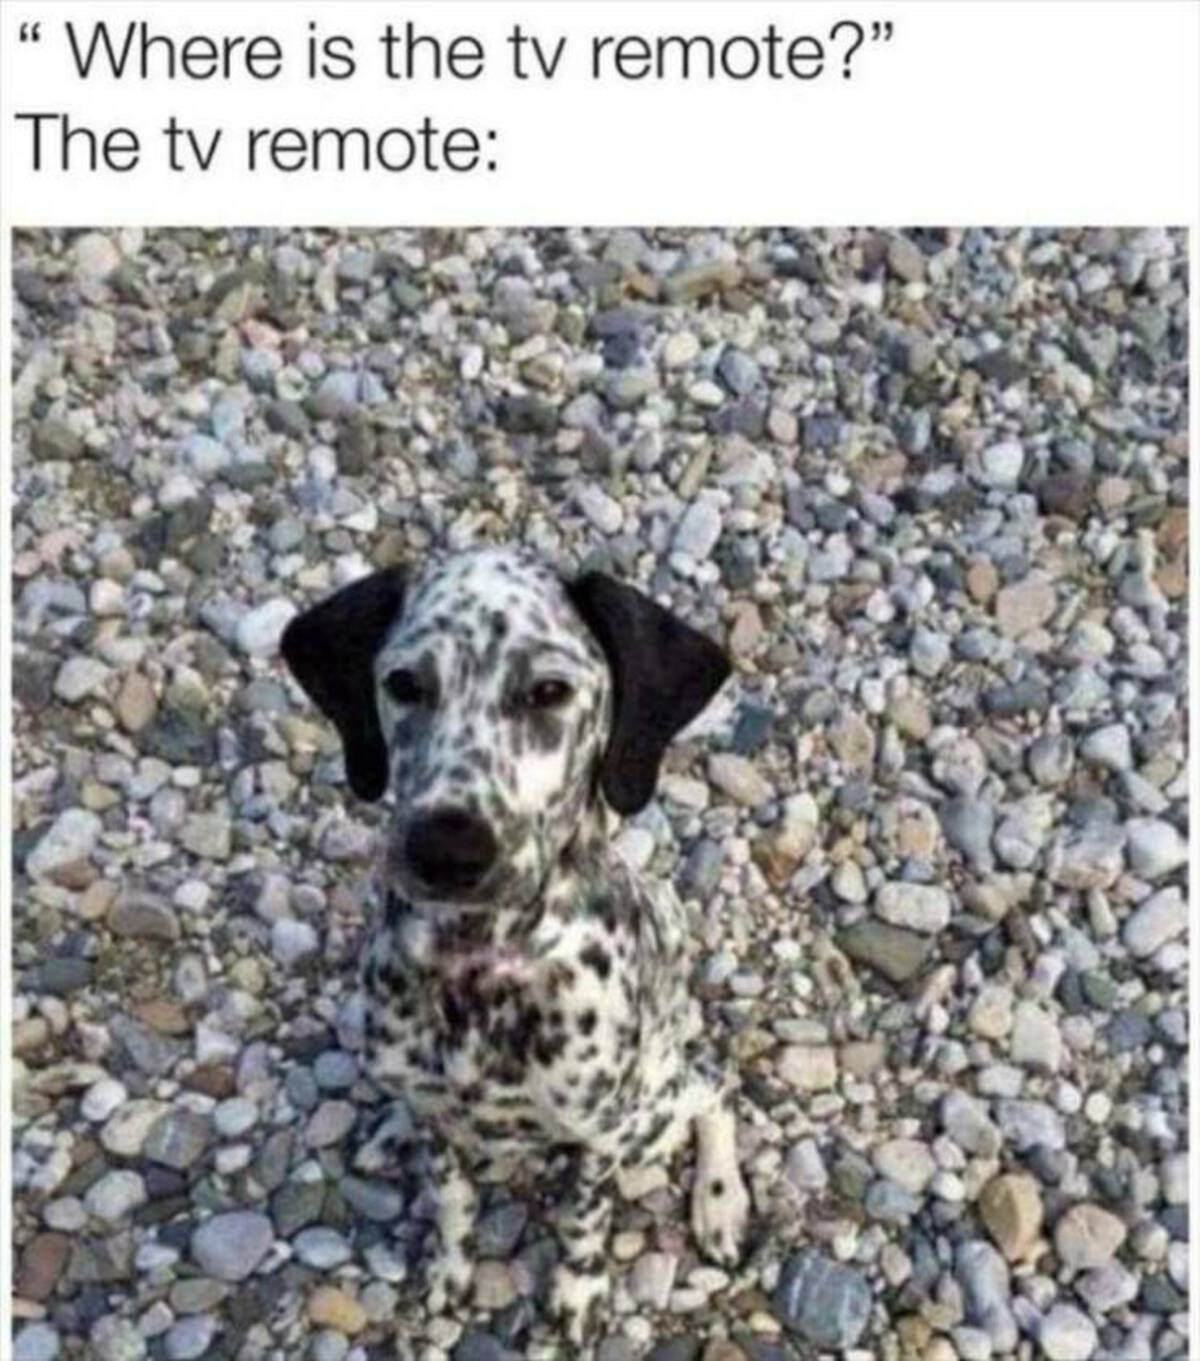 camouflage pets - "Where is the tv remote?" The tv remote